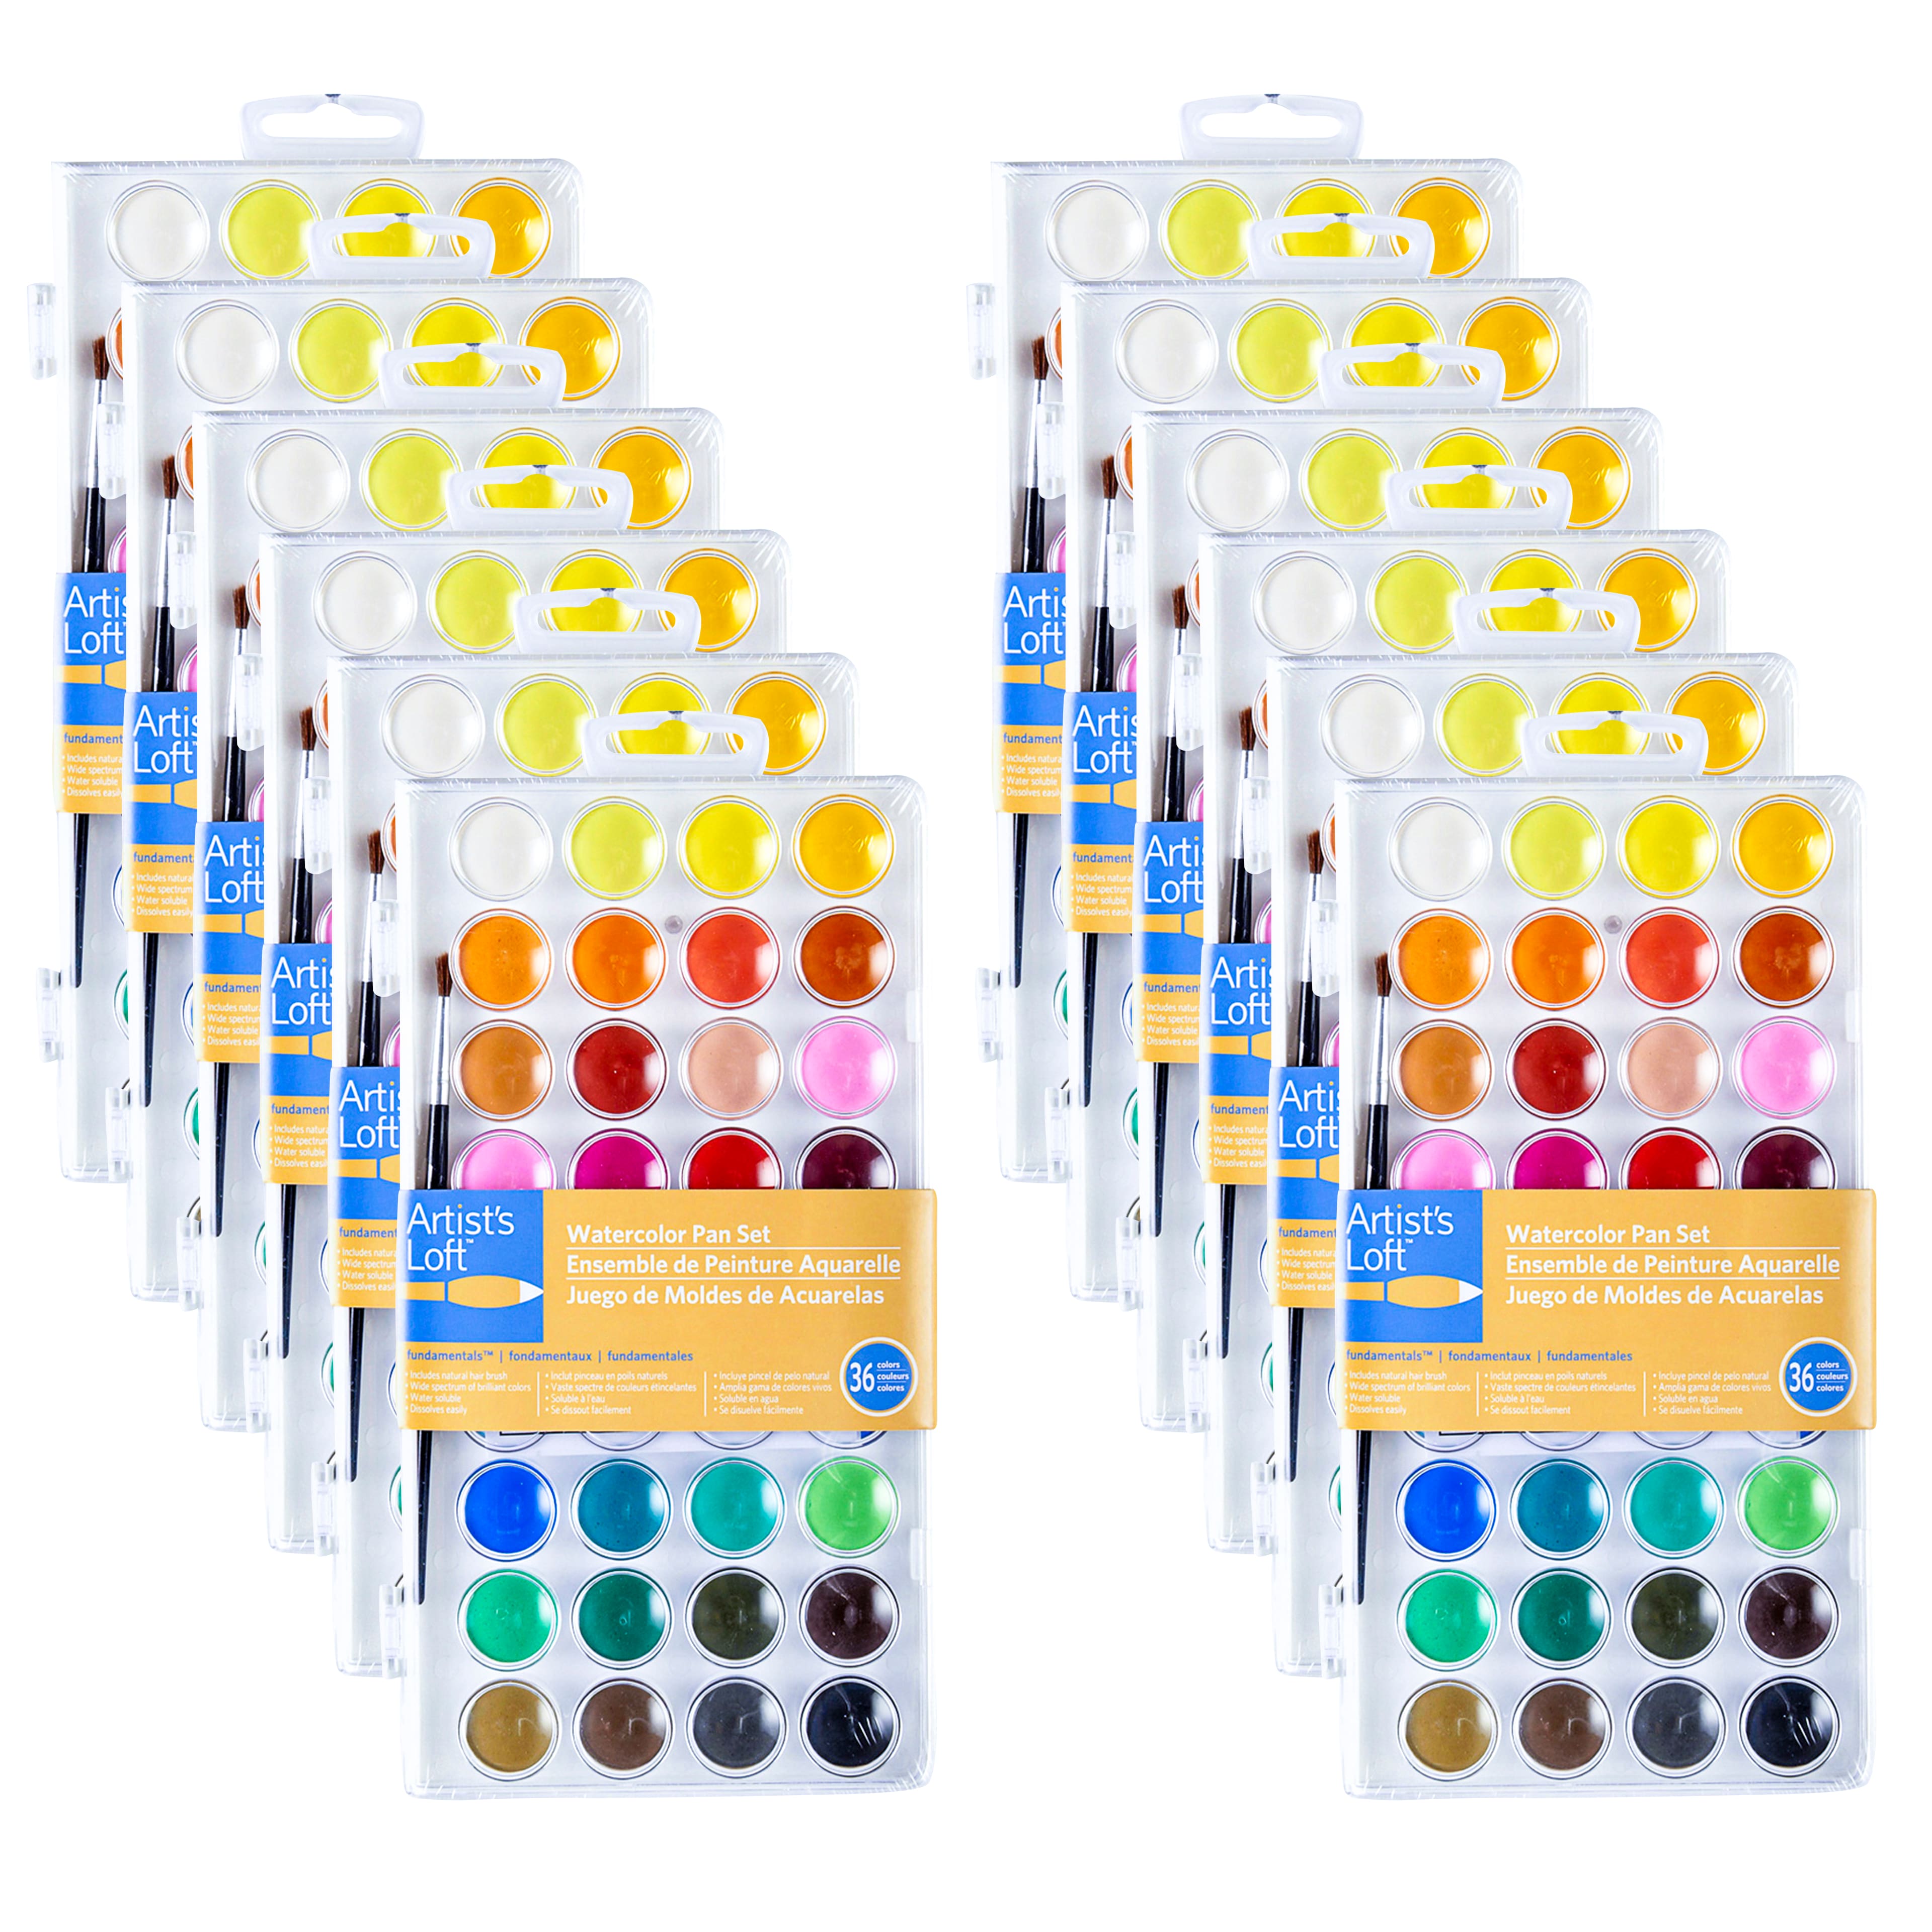 Paint, Sculpt and Draw with Bulk Art Supplies